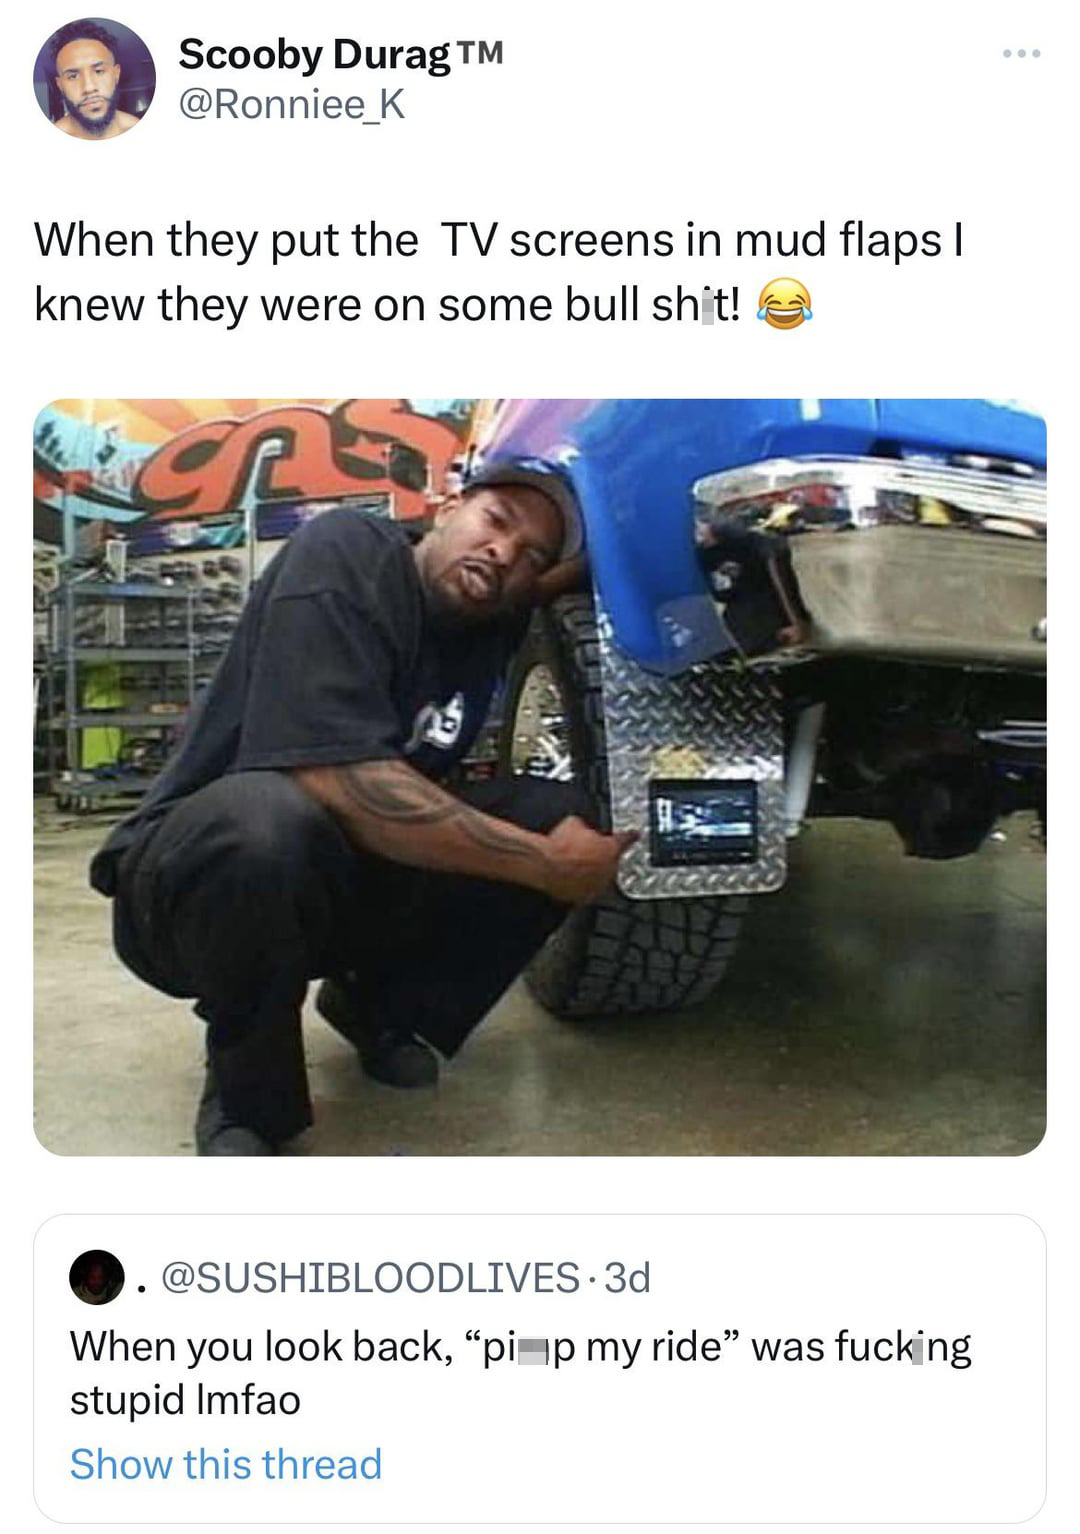 funny tweets and memes - my ride - Scooby Durag M K When they put the Tv screens in mud flaps I knew they were on some bull shit! . When you look back, "pip my ride" was fucking stupid Imfao Show this thread